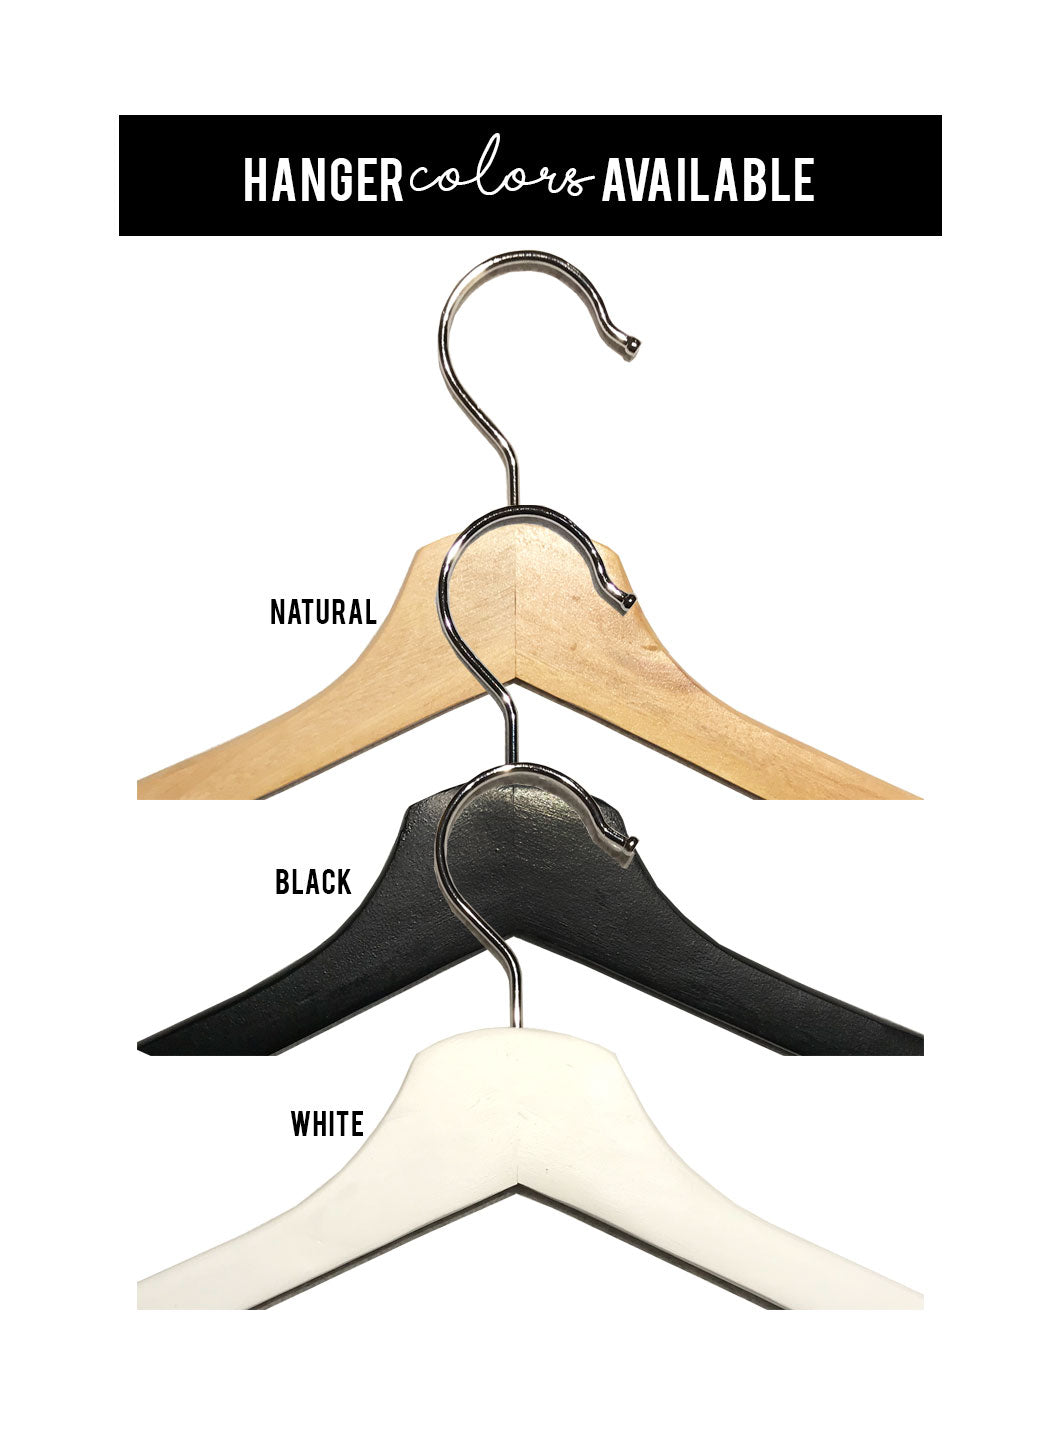 Personalized Hanger - D